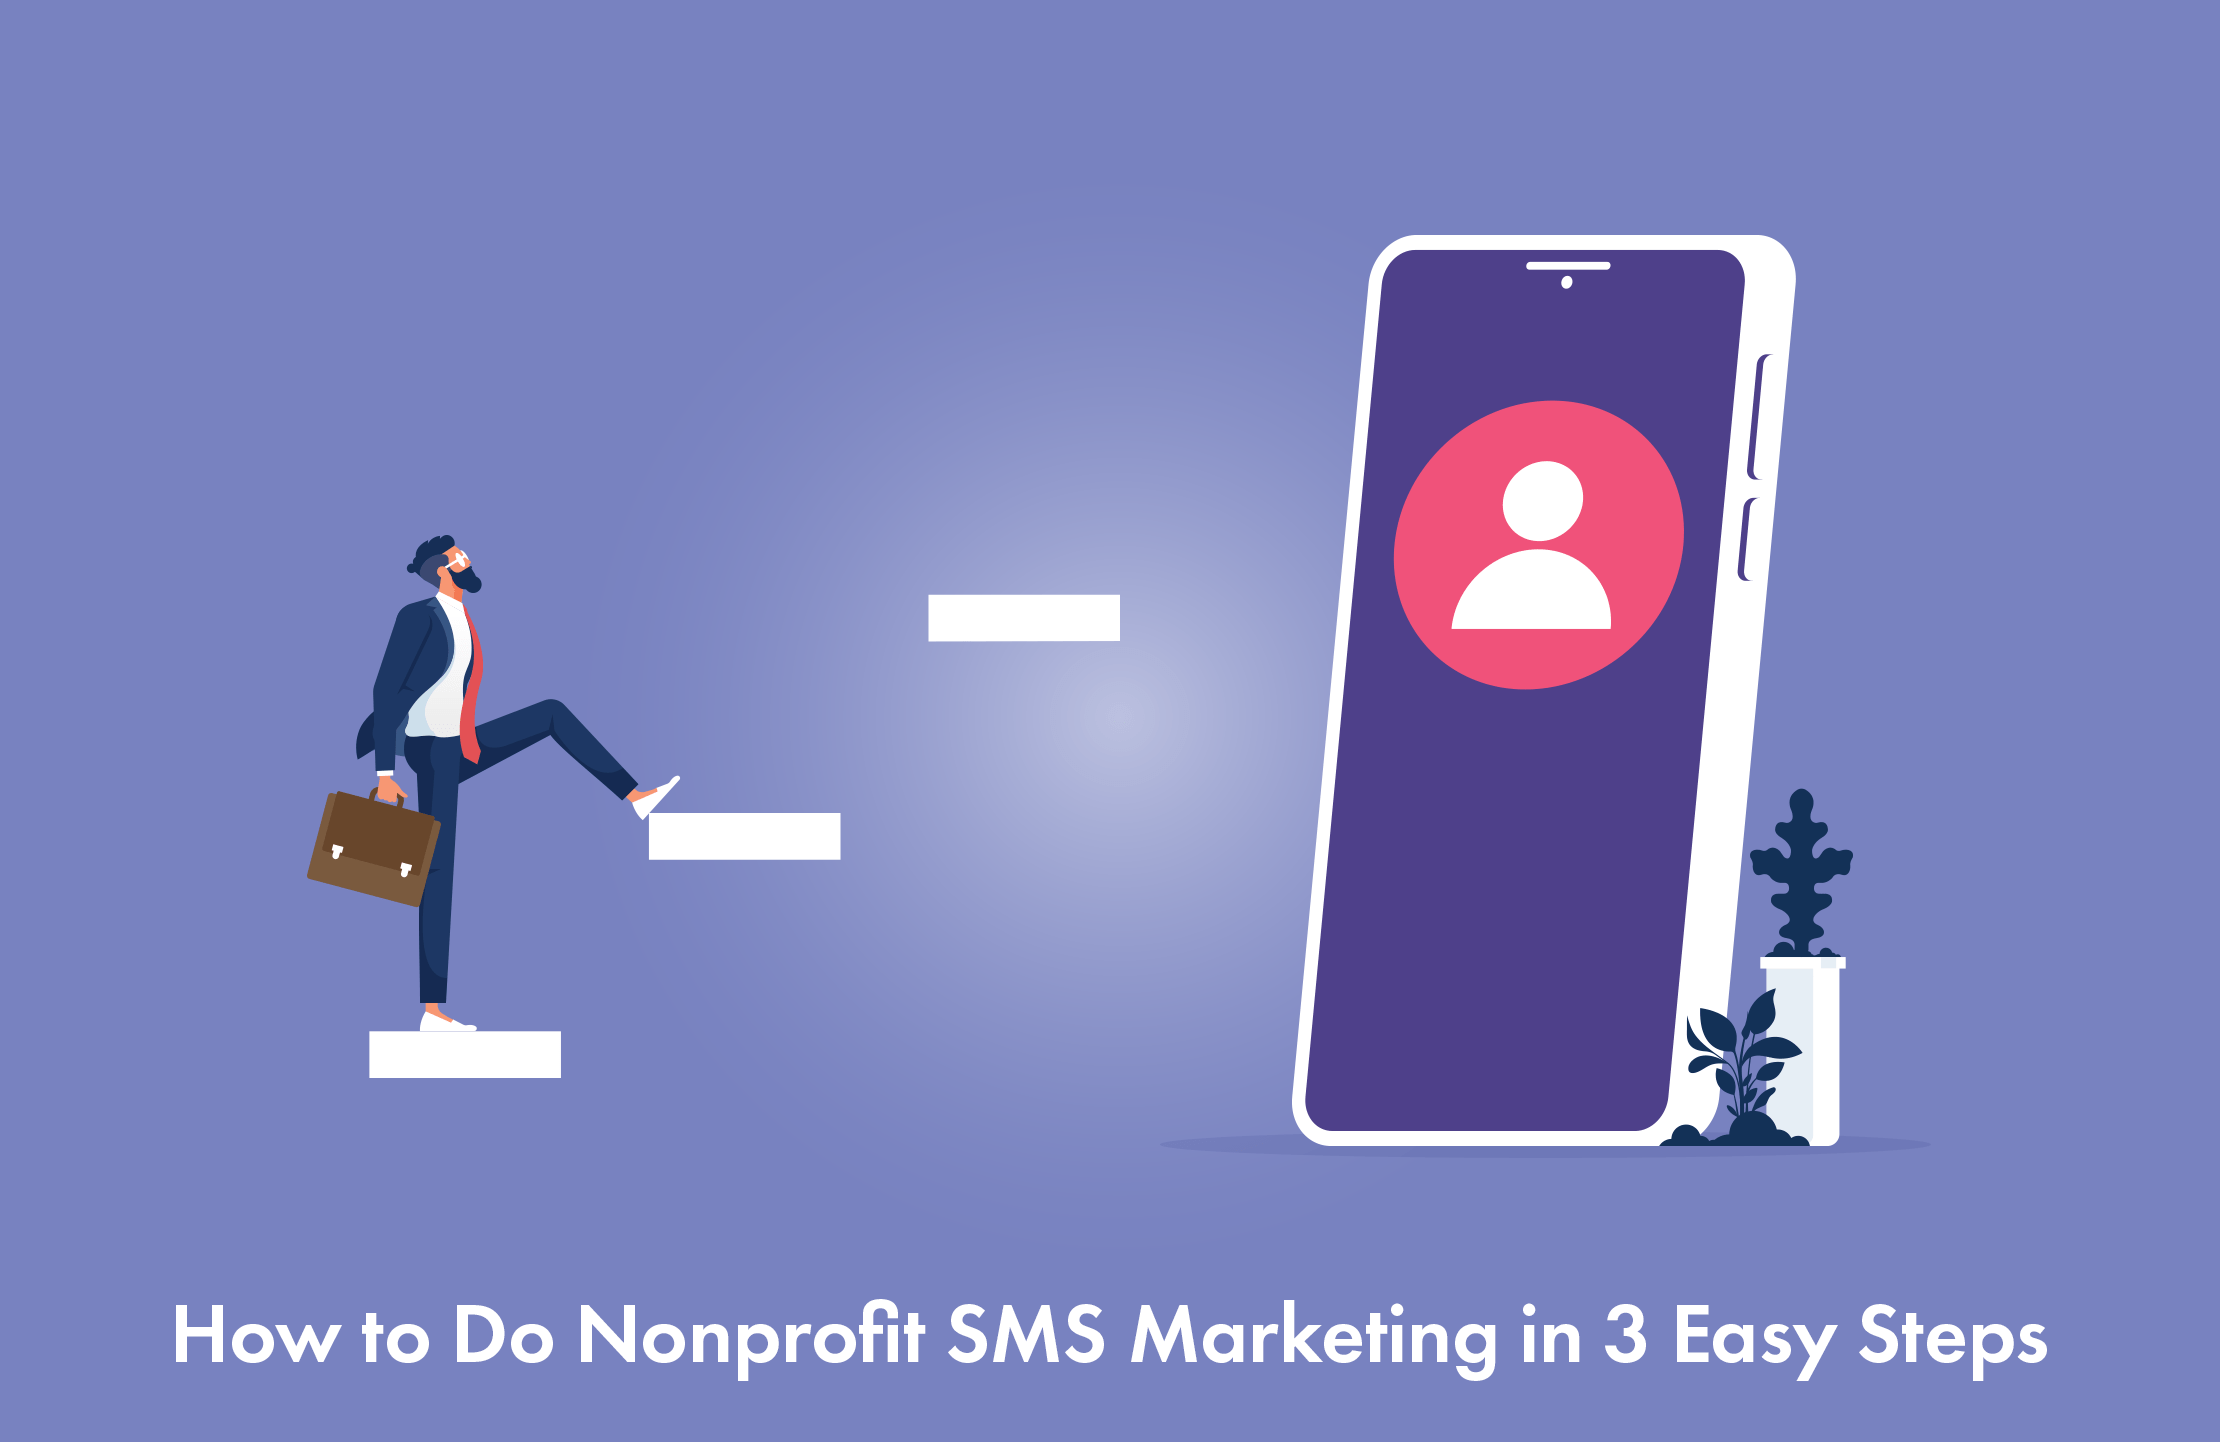 How to Do Nonprofit SMS Marketing in 3 Easy Steps